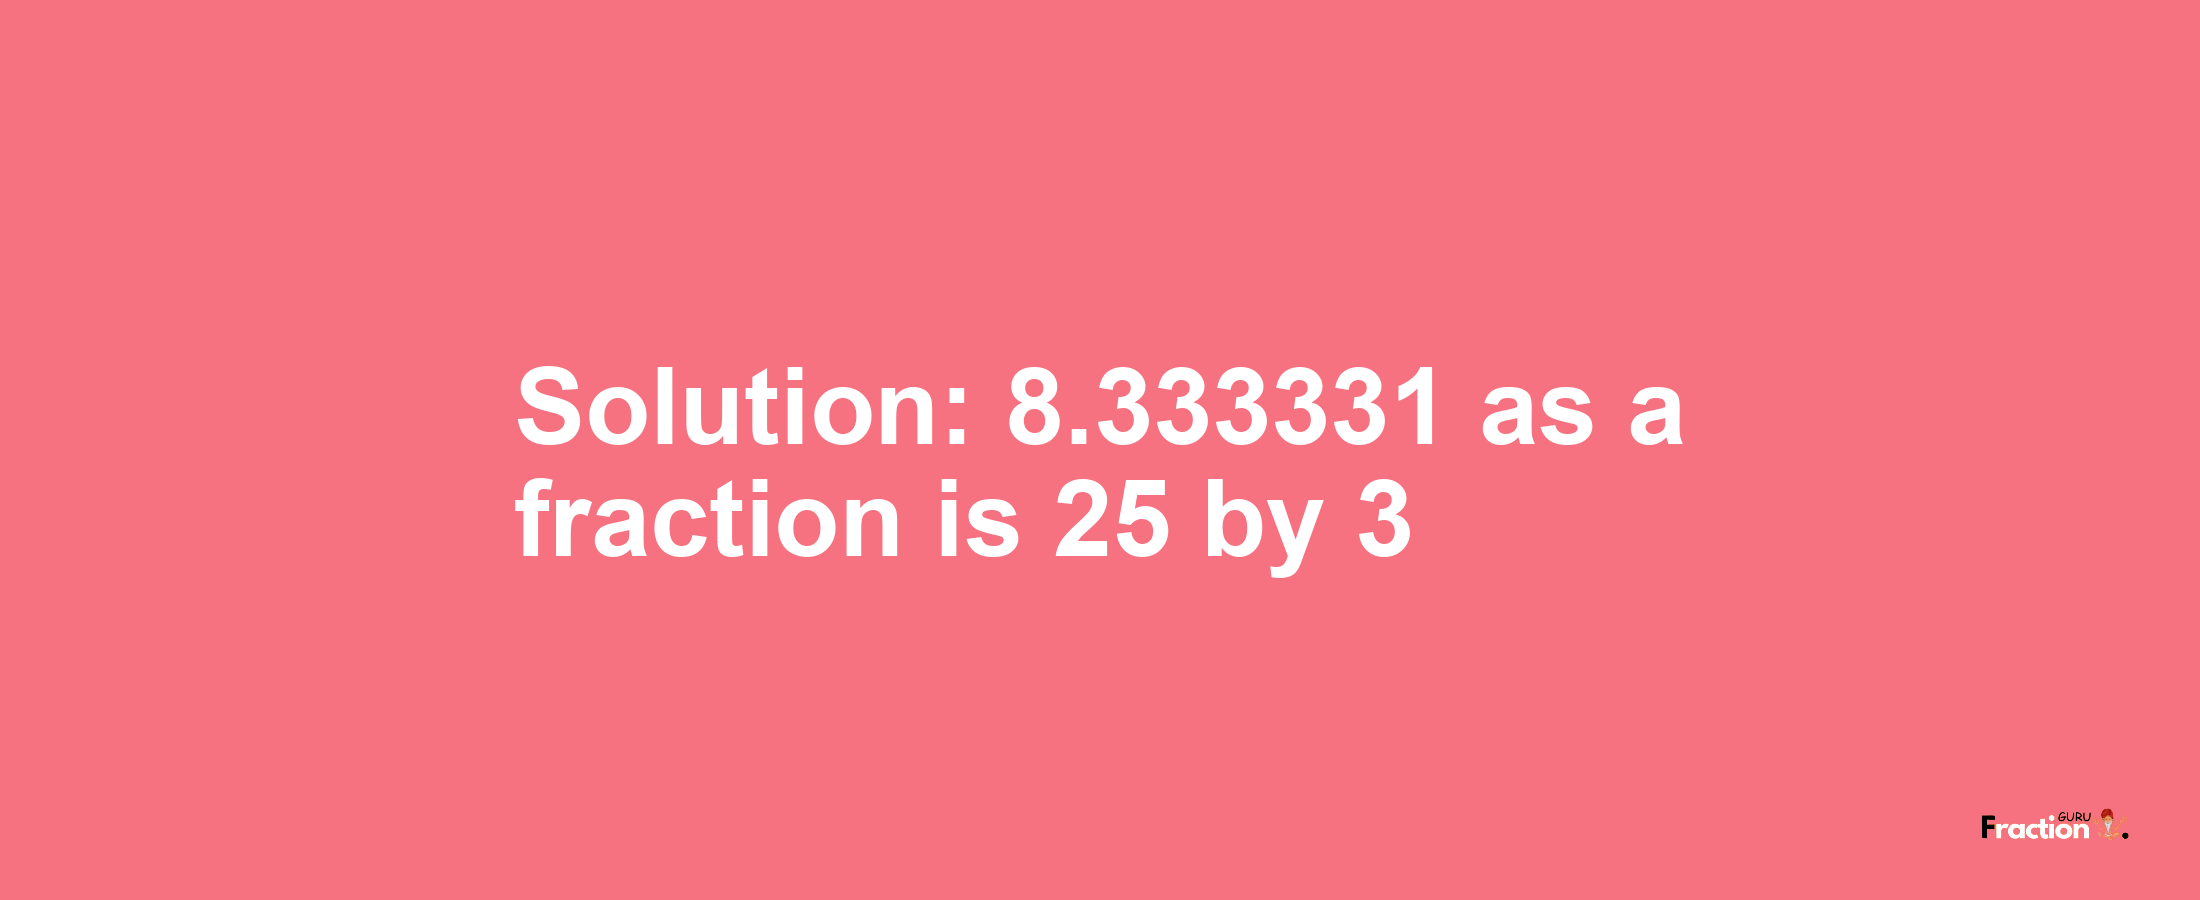 Solution:8.333331 as a fraction is 25/3